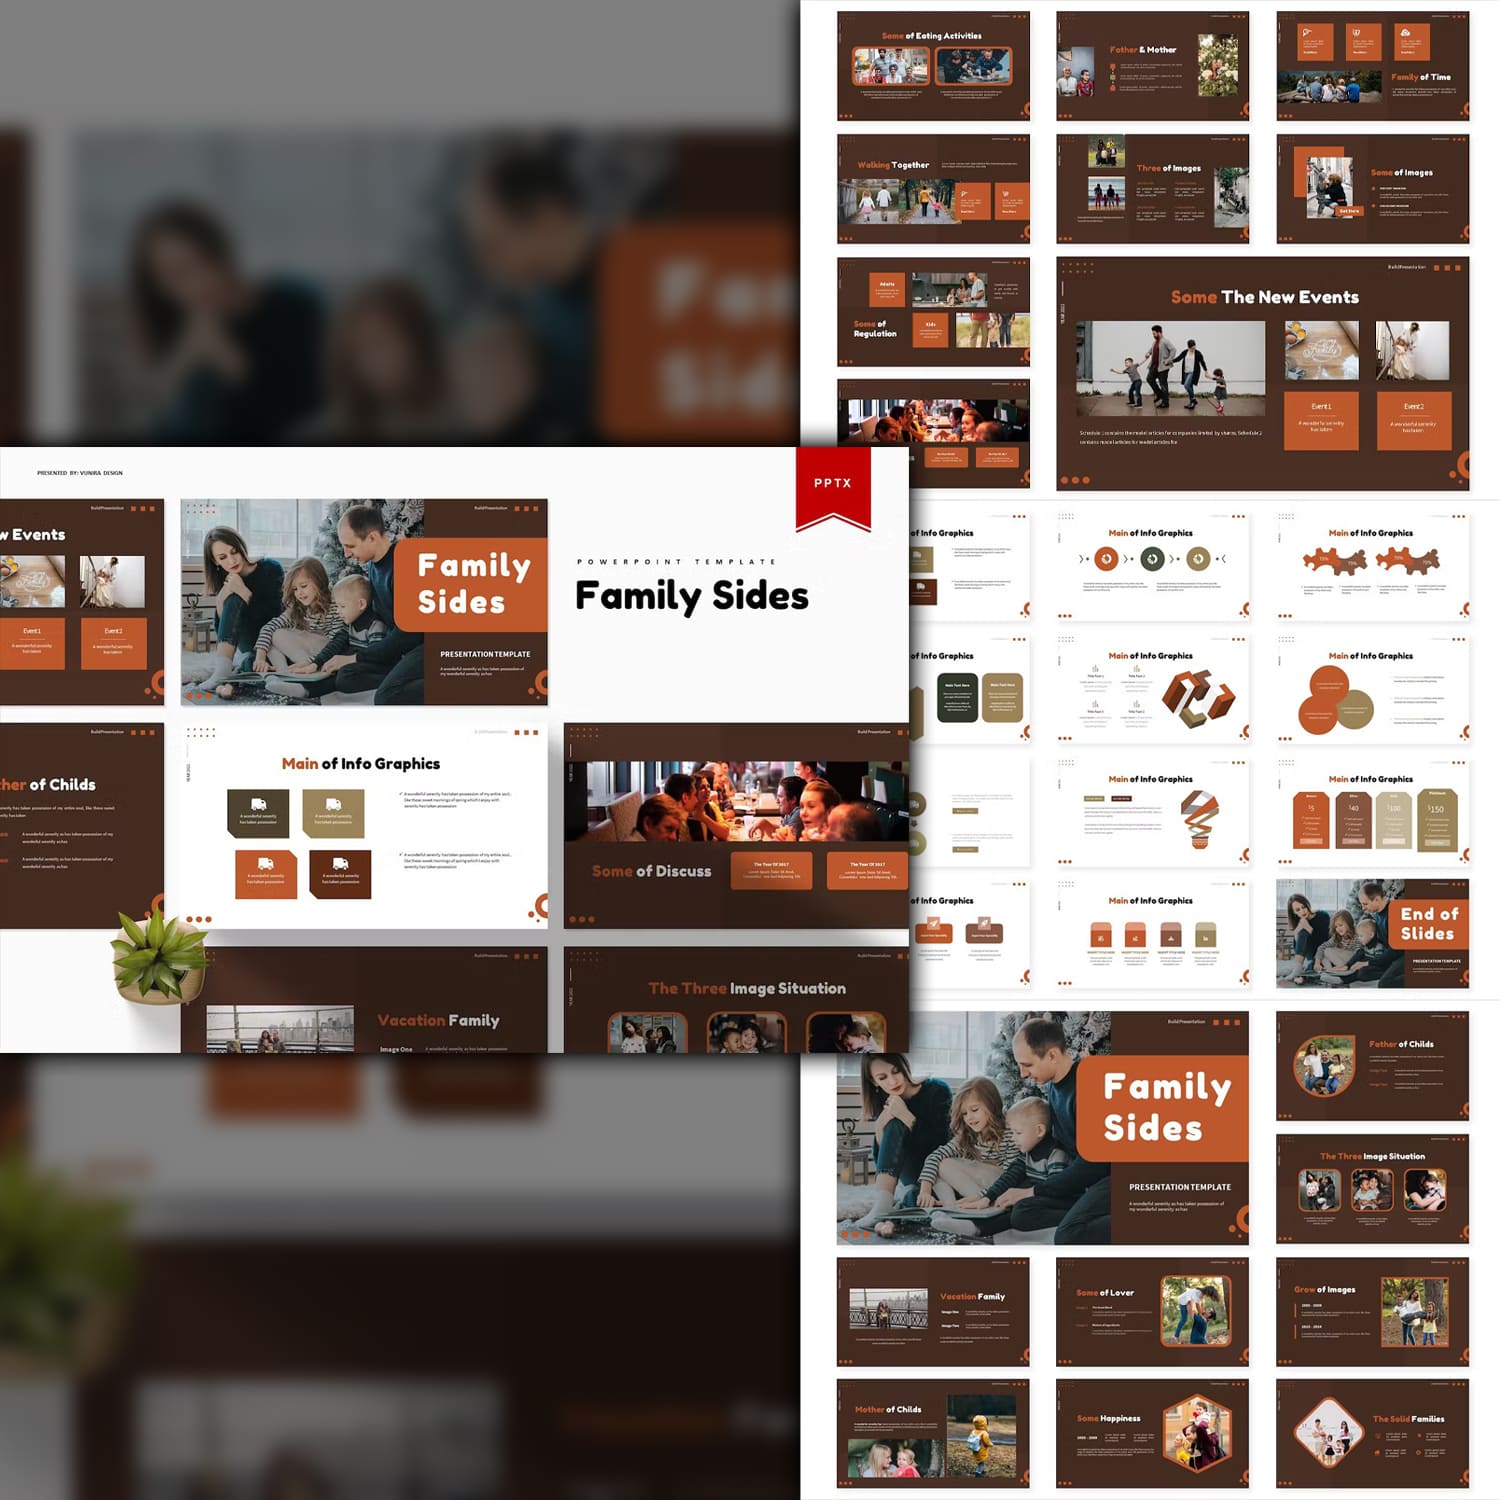 Familly sides powerpoint template from Vunira.